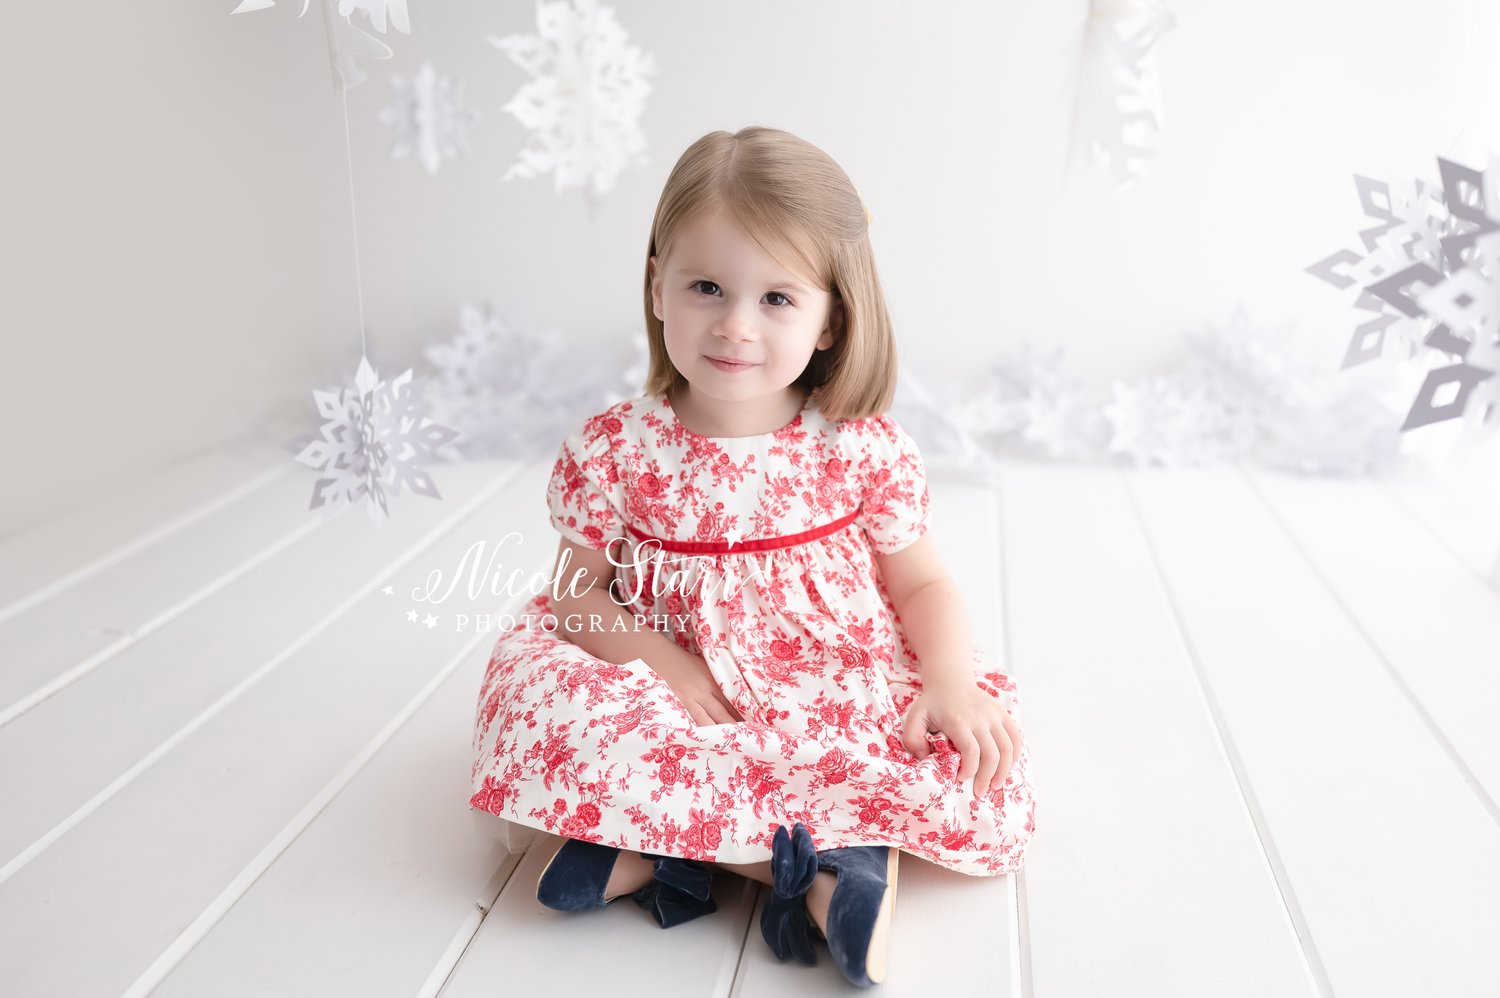 2021 Holiday Portraits in our Saratoga Springs Photography Studio ...